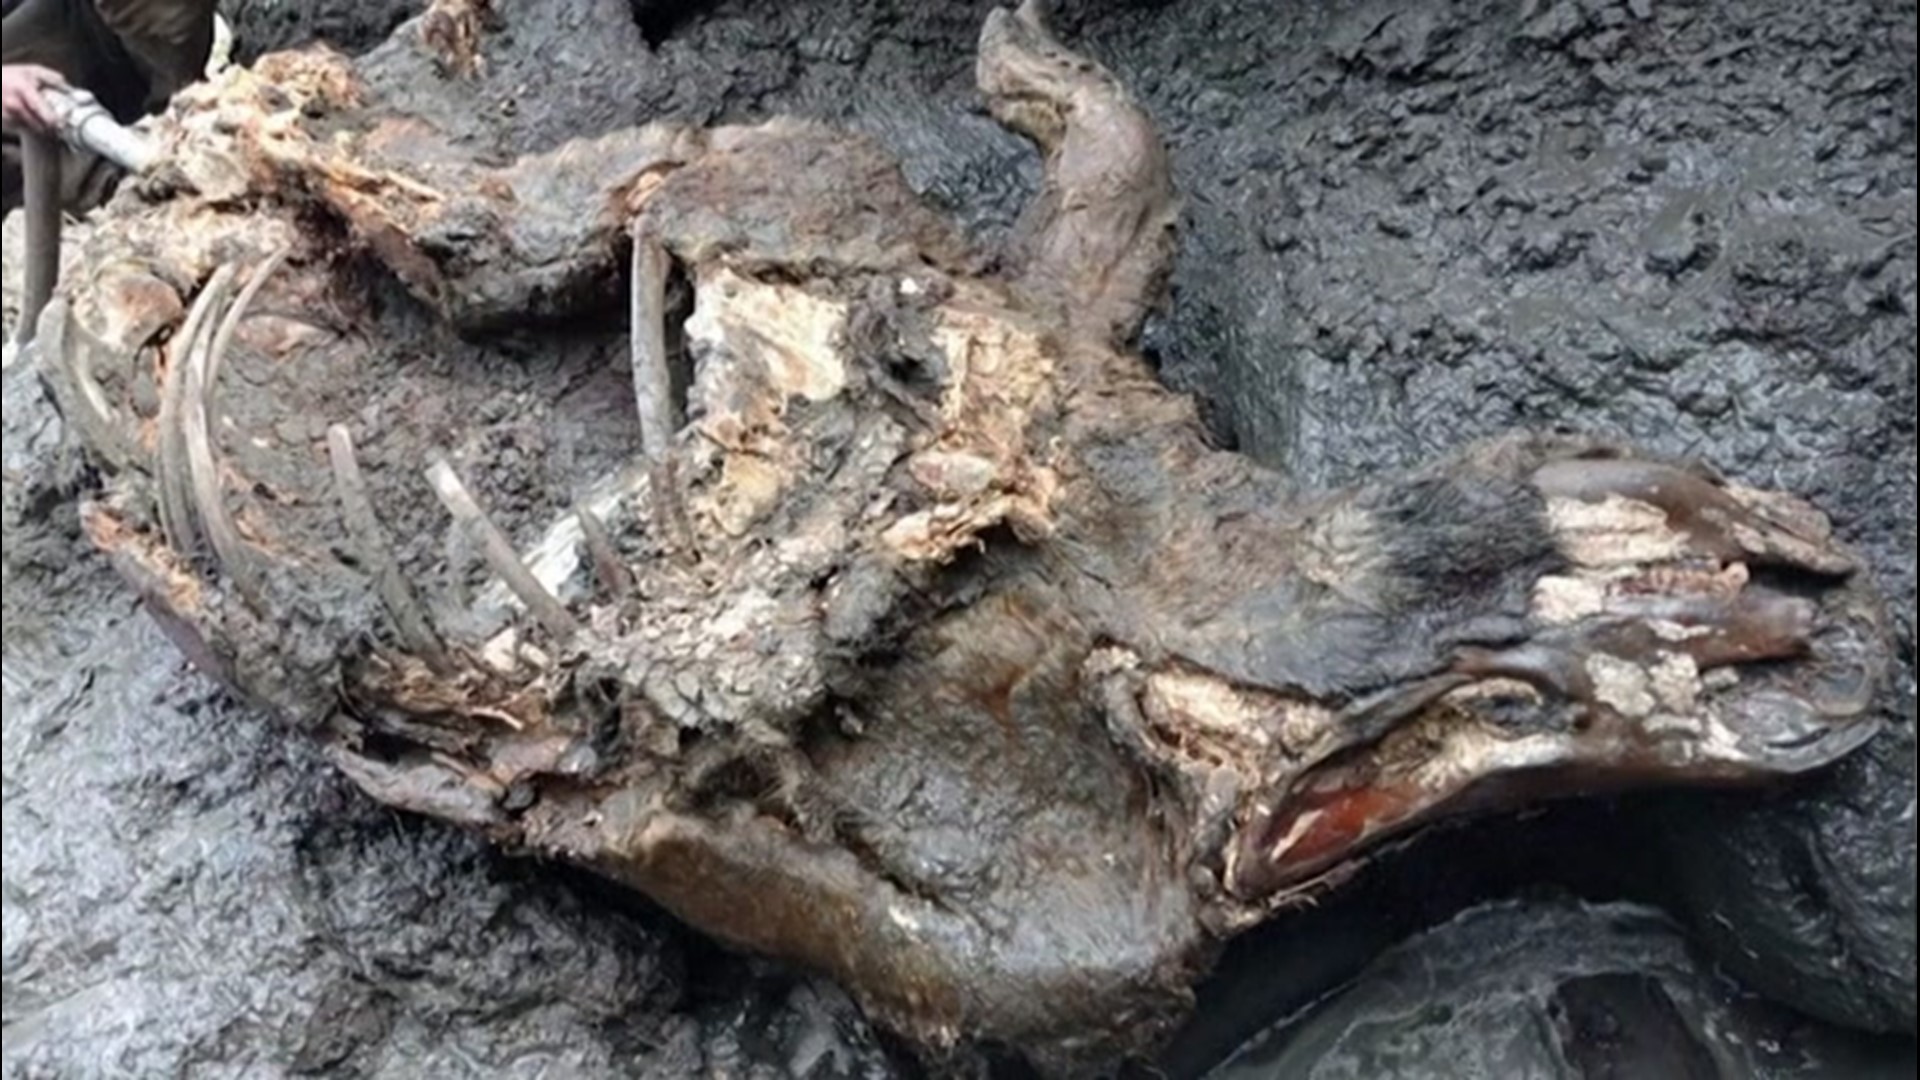 Russian scientists are studying the remains of a wooly rhinoceros found in Yakutia last August after determining that its tusk, limbs, some organs, and even its wool were preserved in permafrost that's now thawing due to climate change.